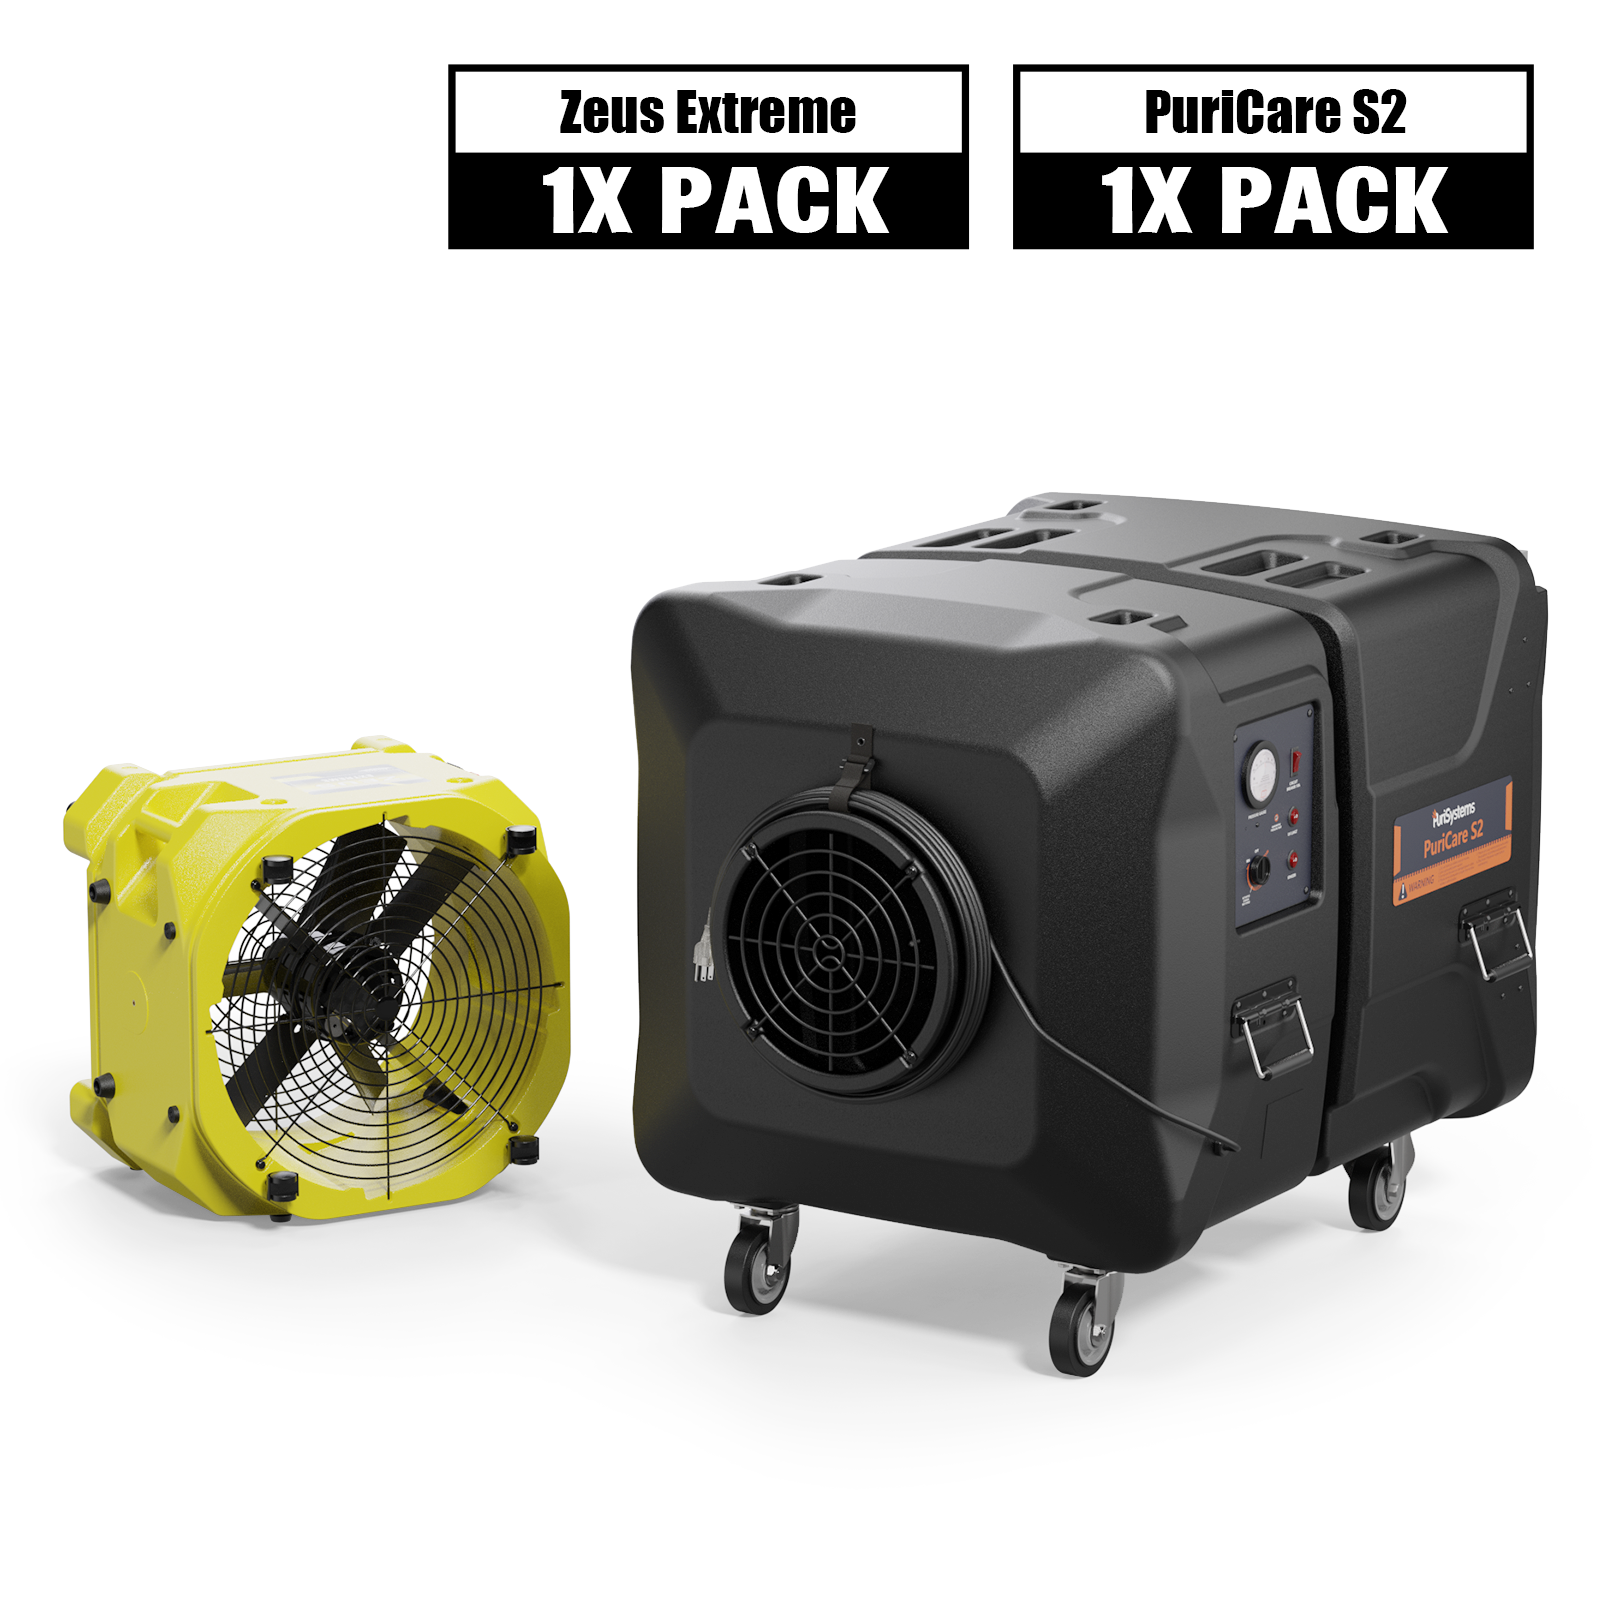 Alorair® Commercial Fire & Smoke Restoration Combo Pack, 1 x Air Mover and 1 x Scrubber | Zeus Extreme & PuriCare S2